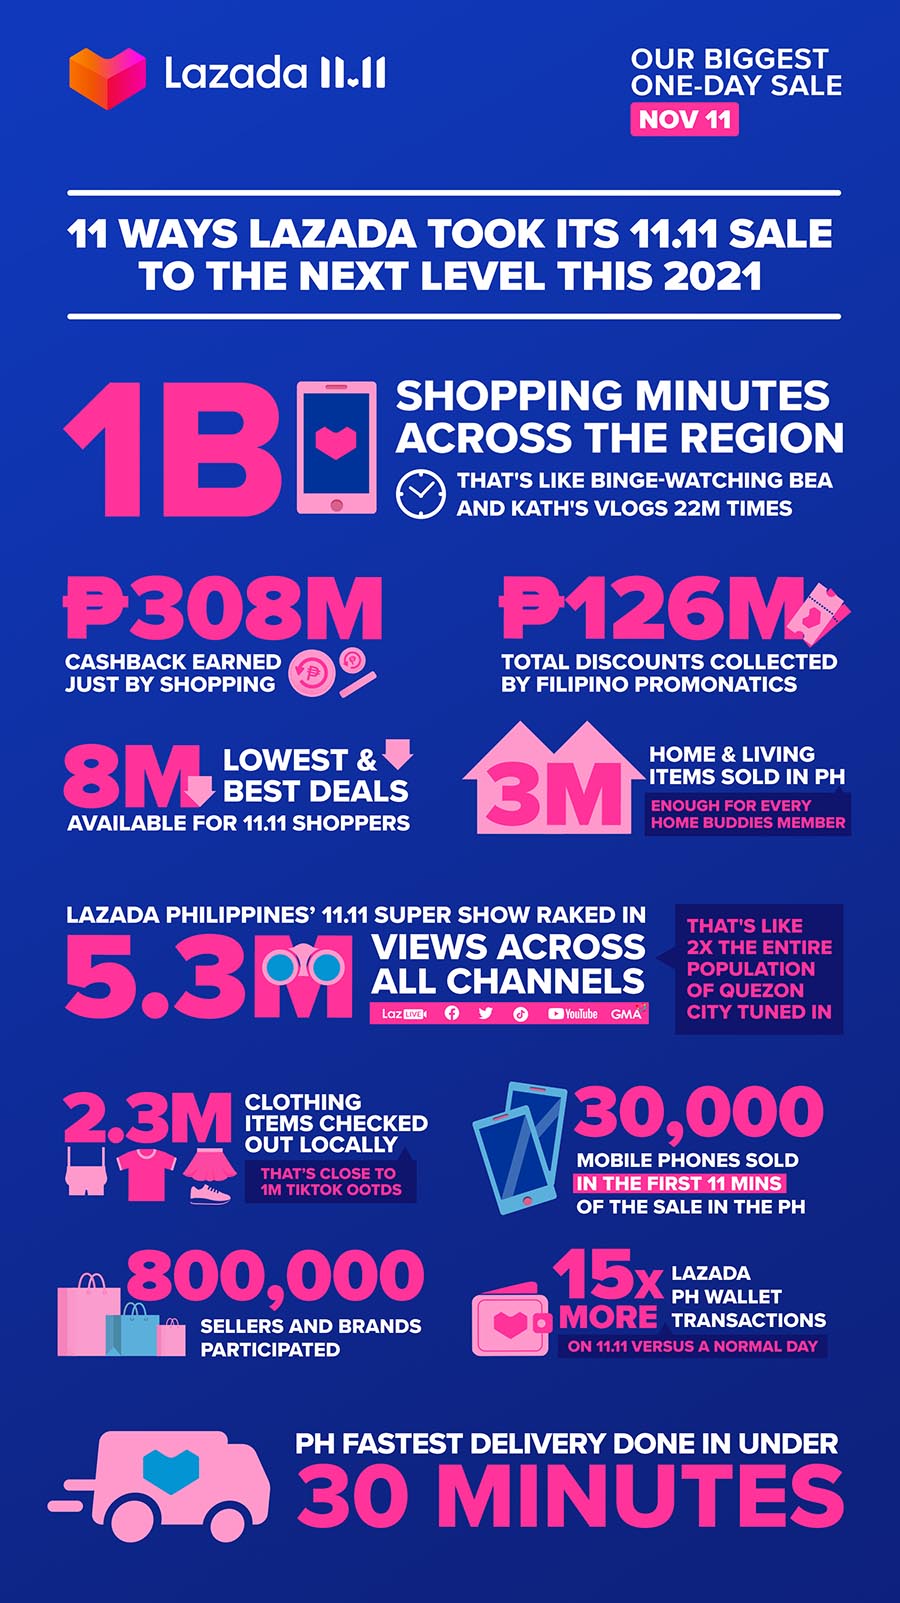 11 ways Lazada took its 11.11 sale to the next level this 2021